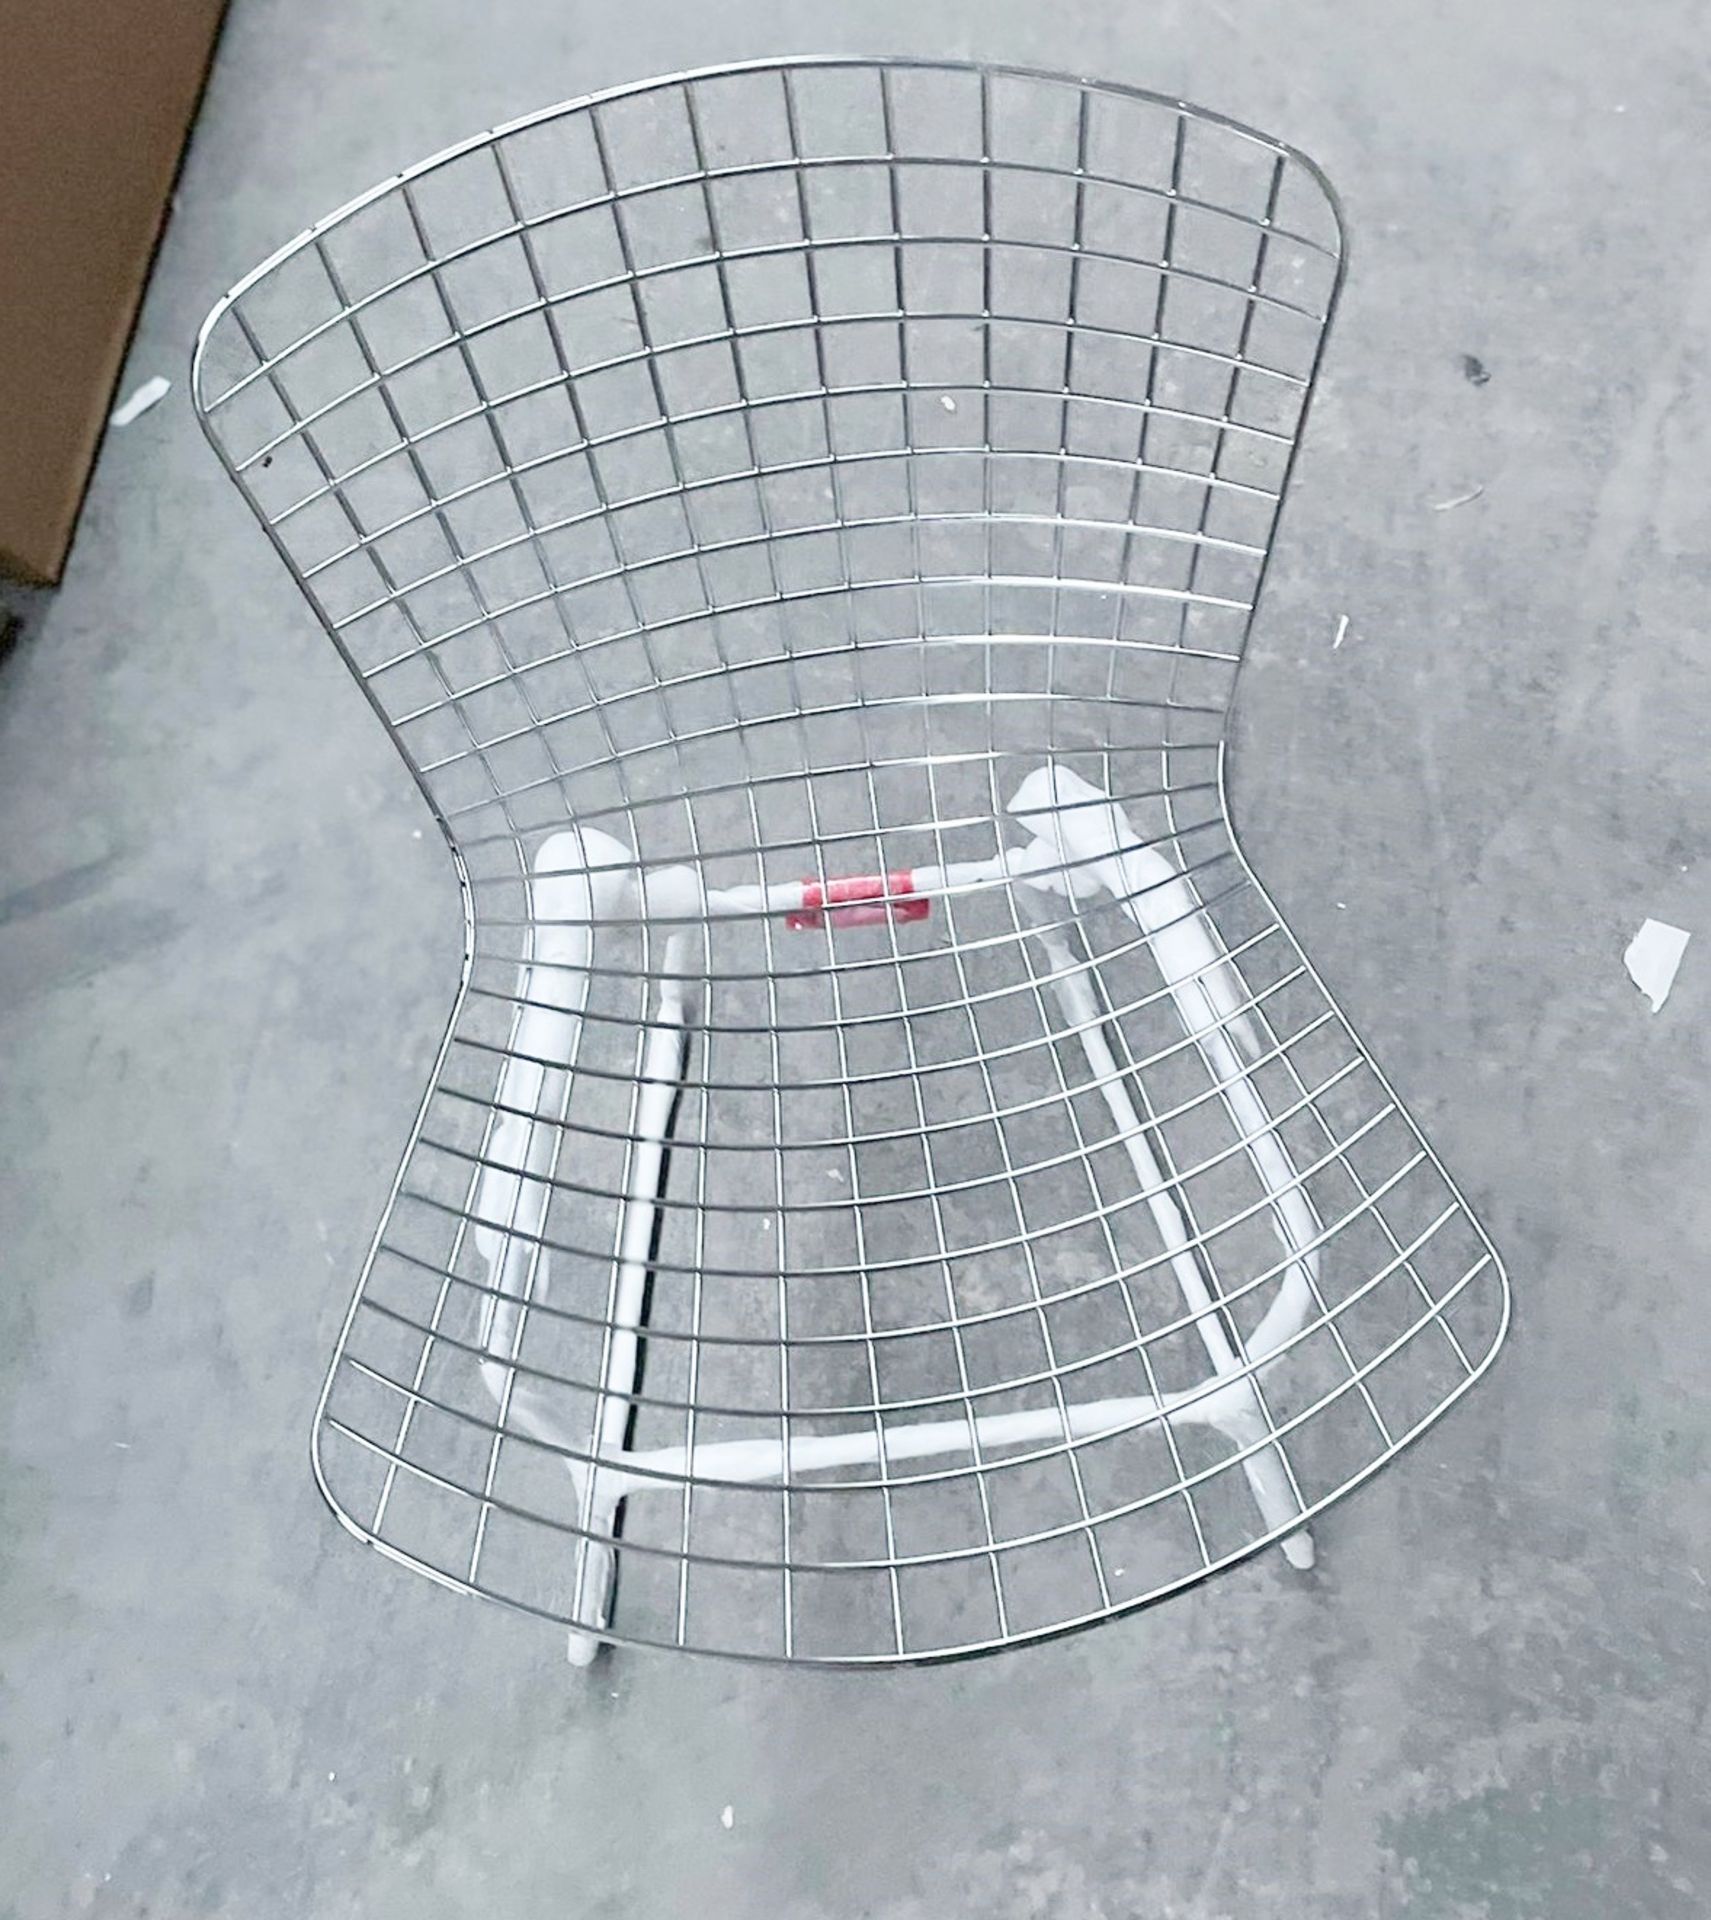 3 x Cubic Side Designer-Inspired Chair With Chrome Frame - Dimensions: 78(h) x 501(d) x 50(w) - Image 4 of 5